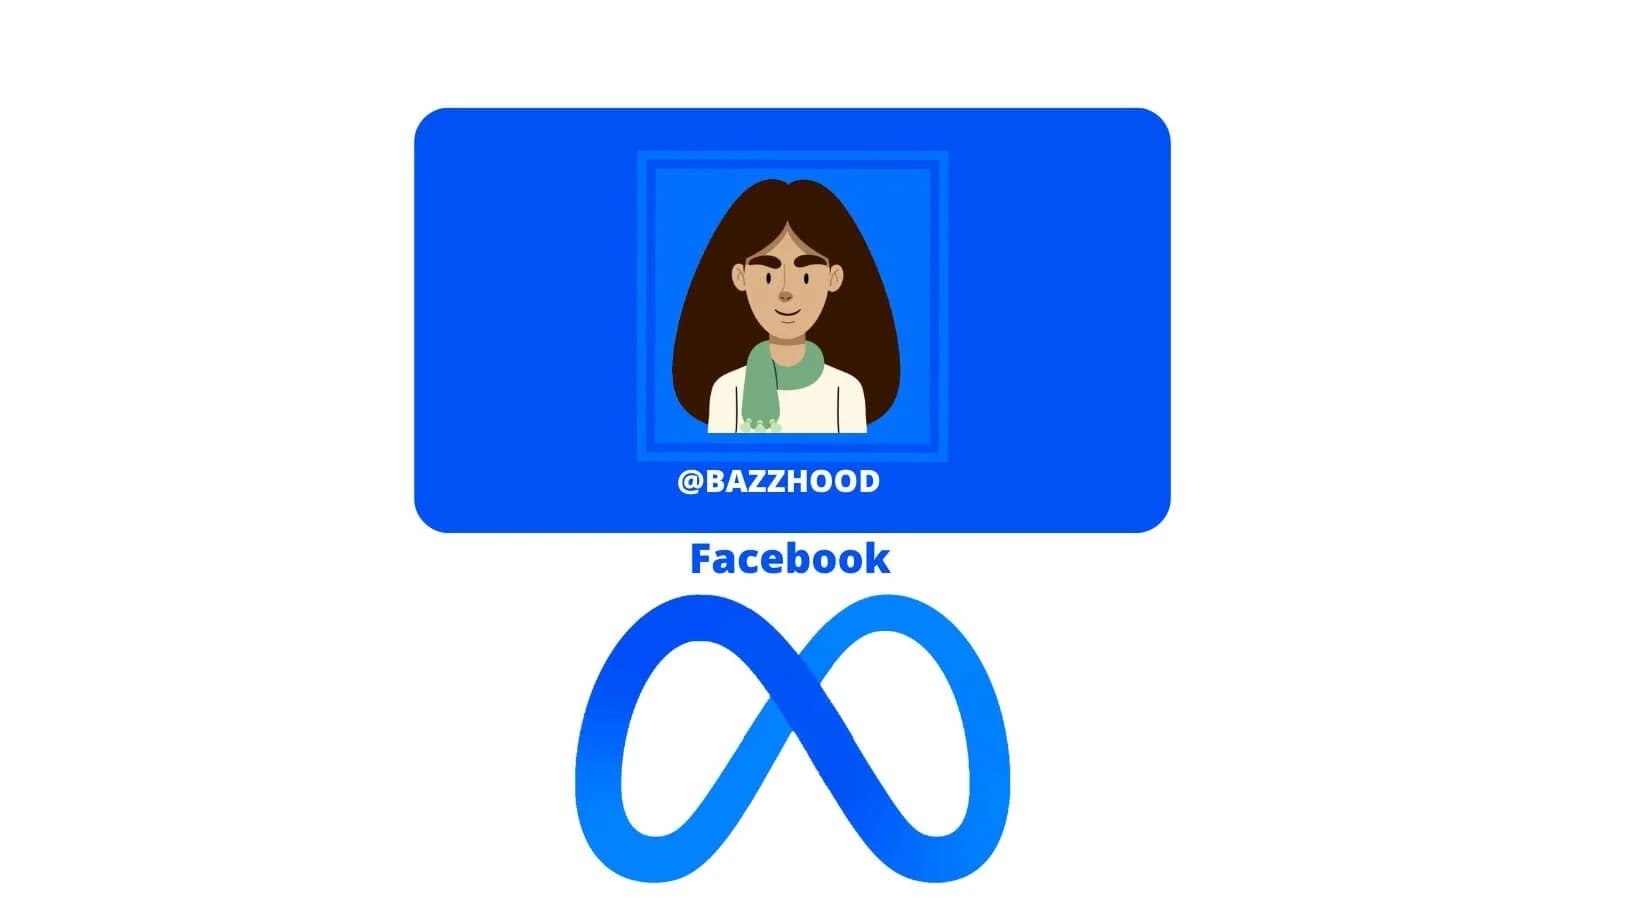 A profile picture is the most important part of a Facebook account, and with over 2.27 billion users, it's important to know how to change your profile pic.